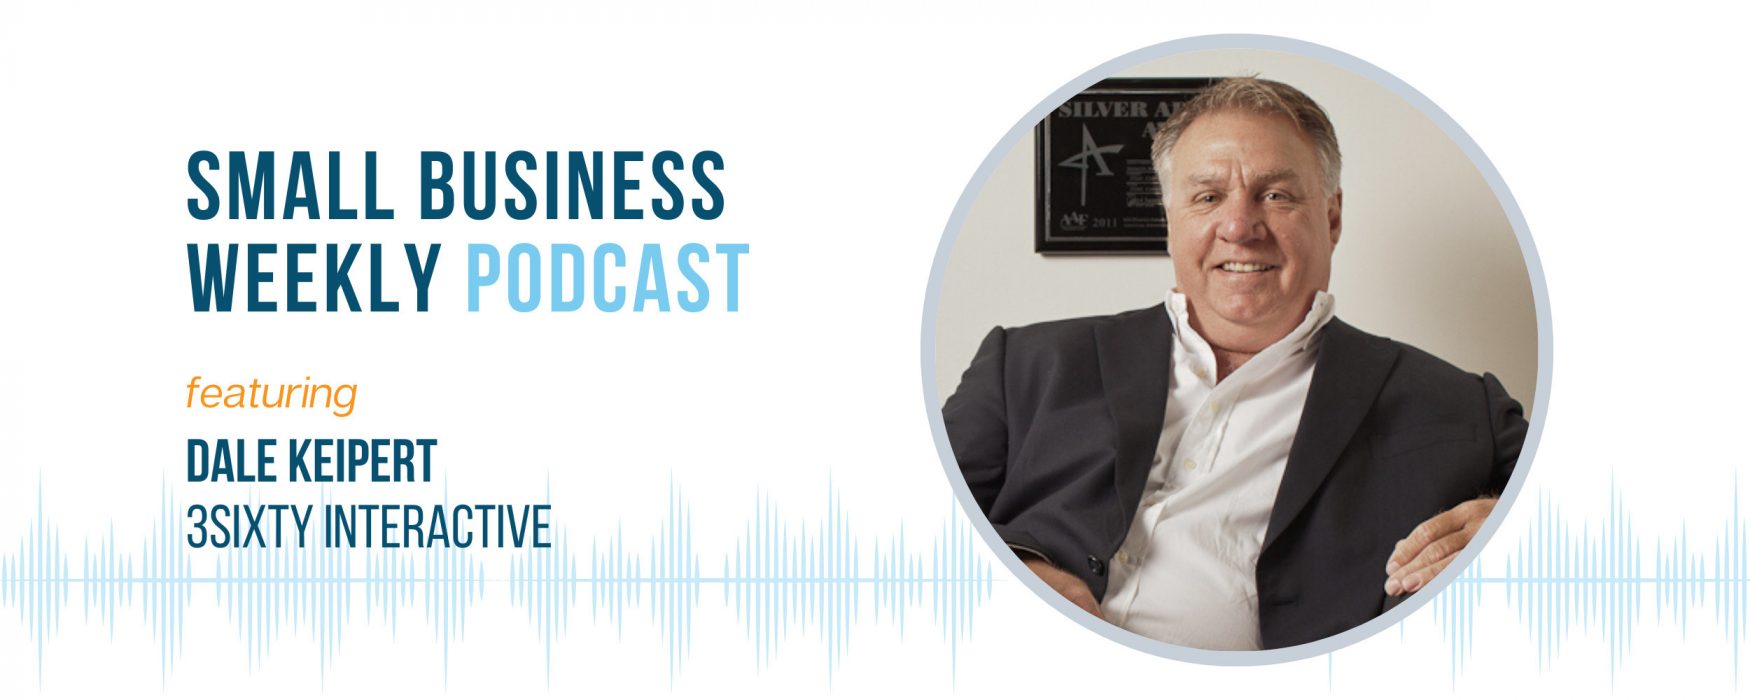 Small Business Weekly podcast guest Dale Keipert